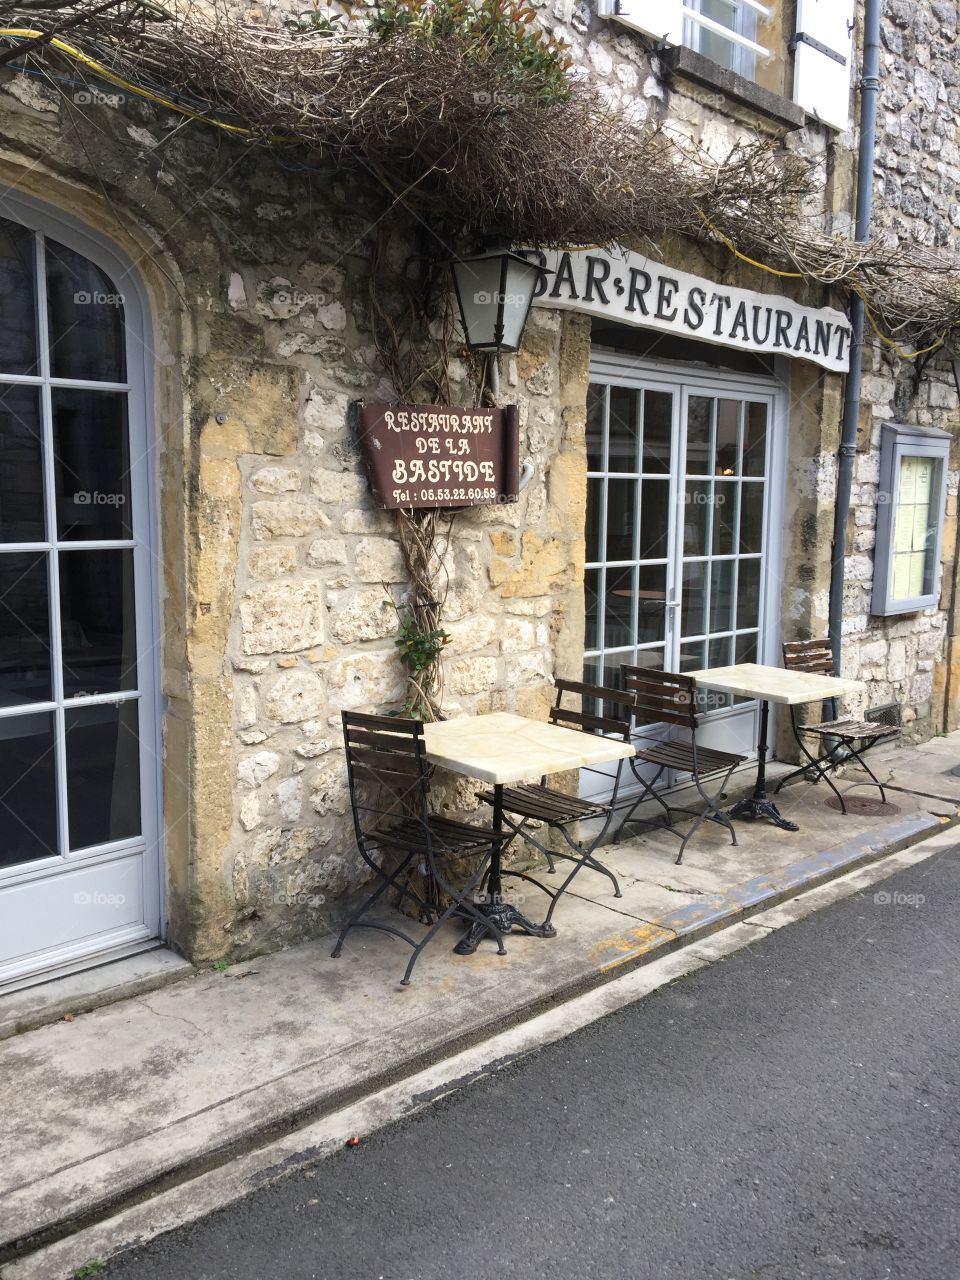 Seating outside a restaurant, France.